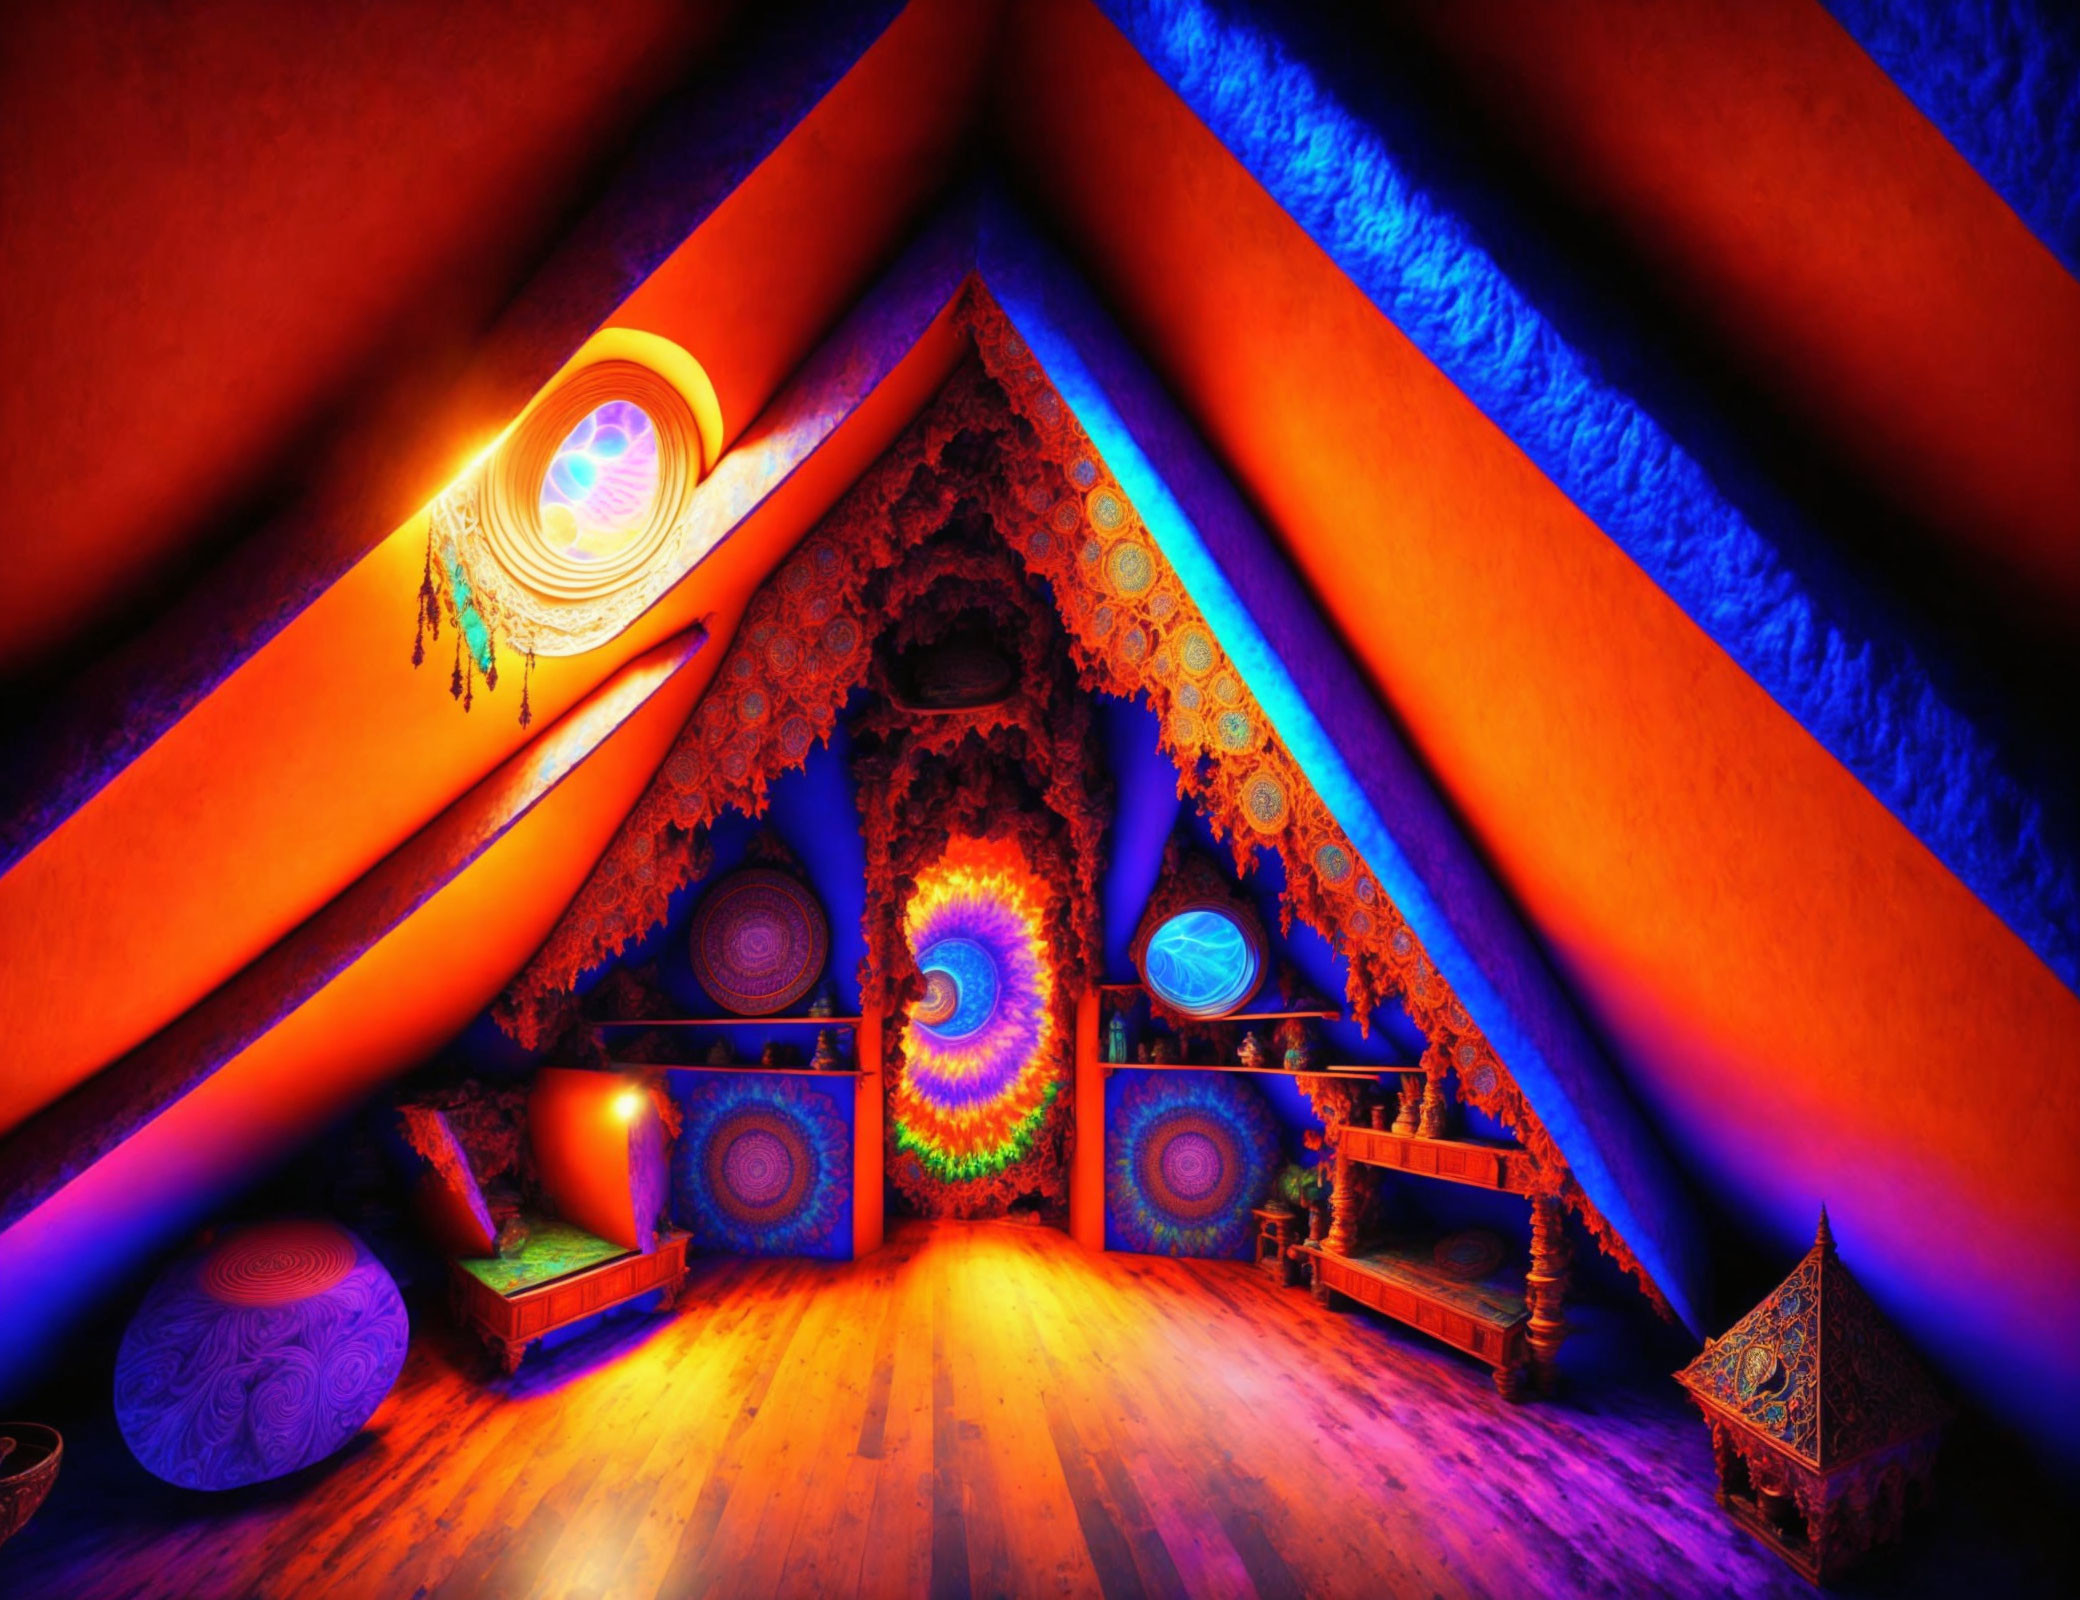 Colorful room with blue and orange walls, psychedelic patterns, wooden floor, and intricate decorations.